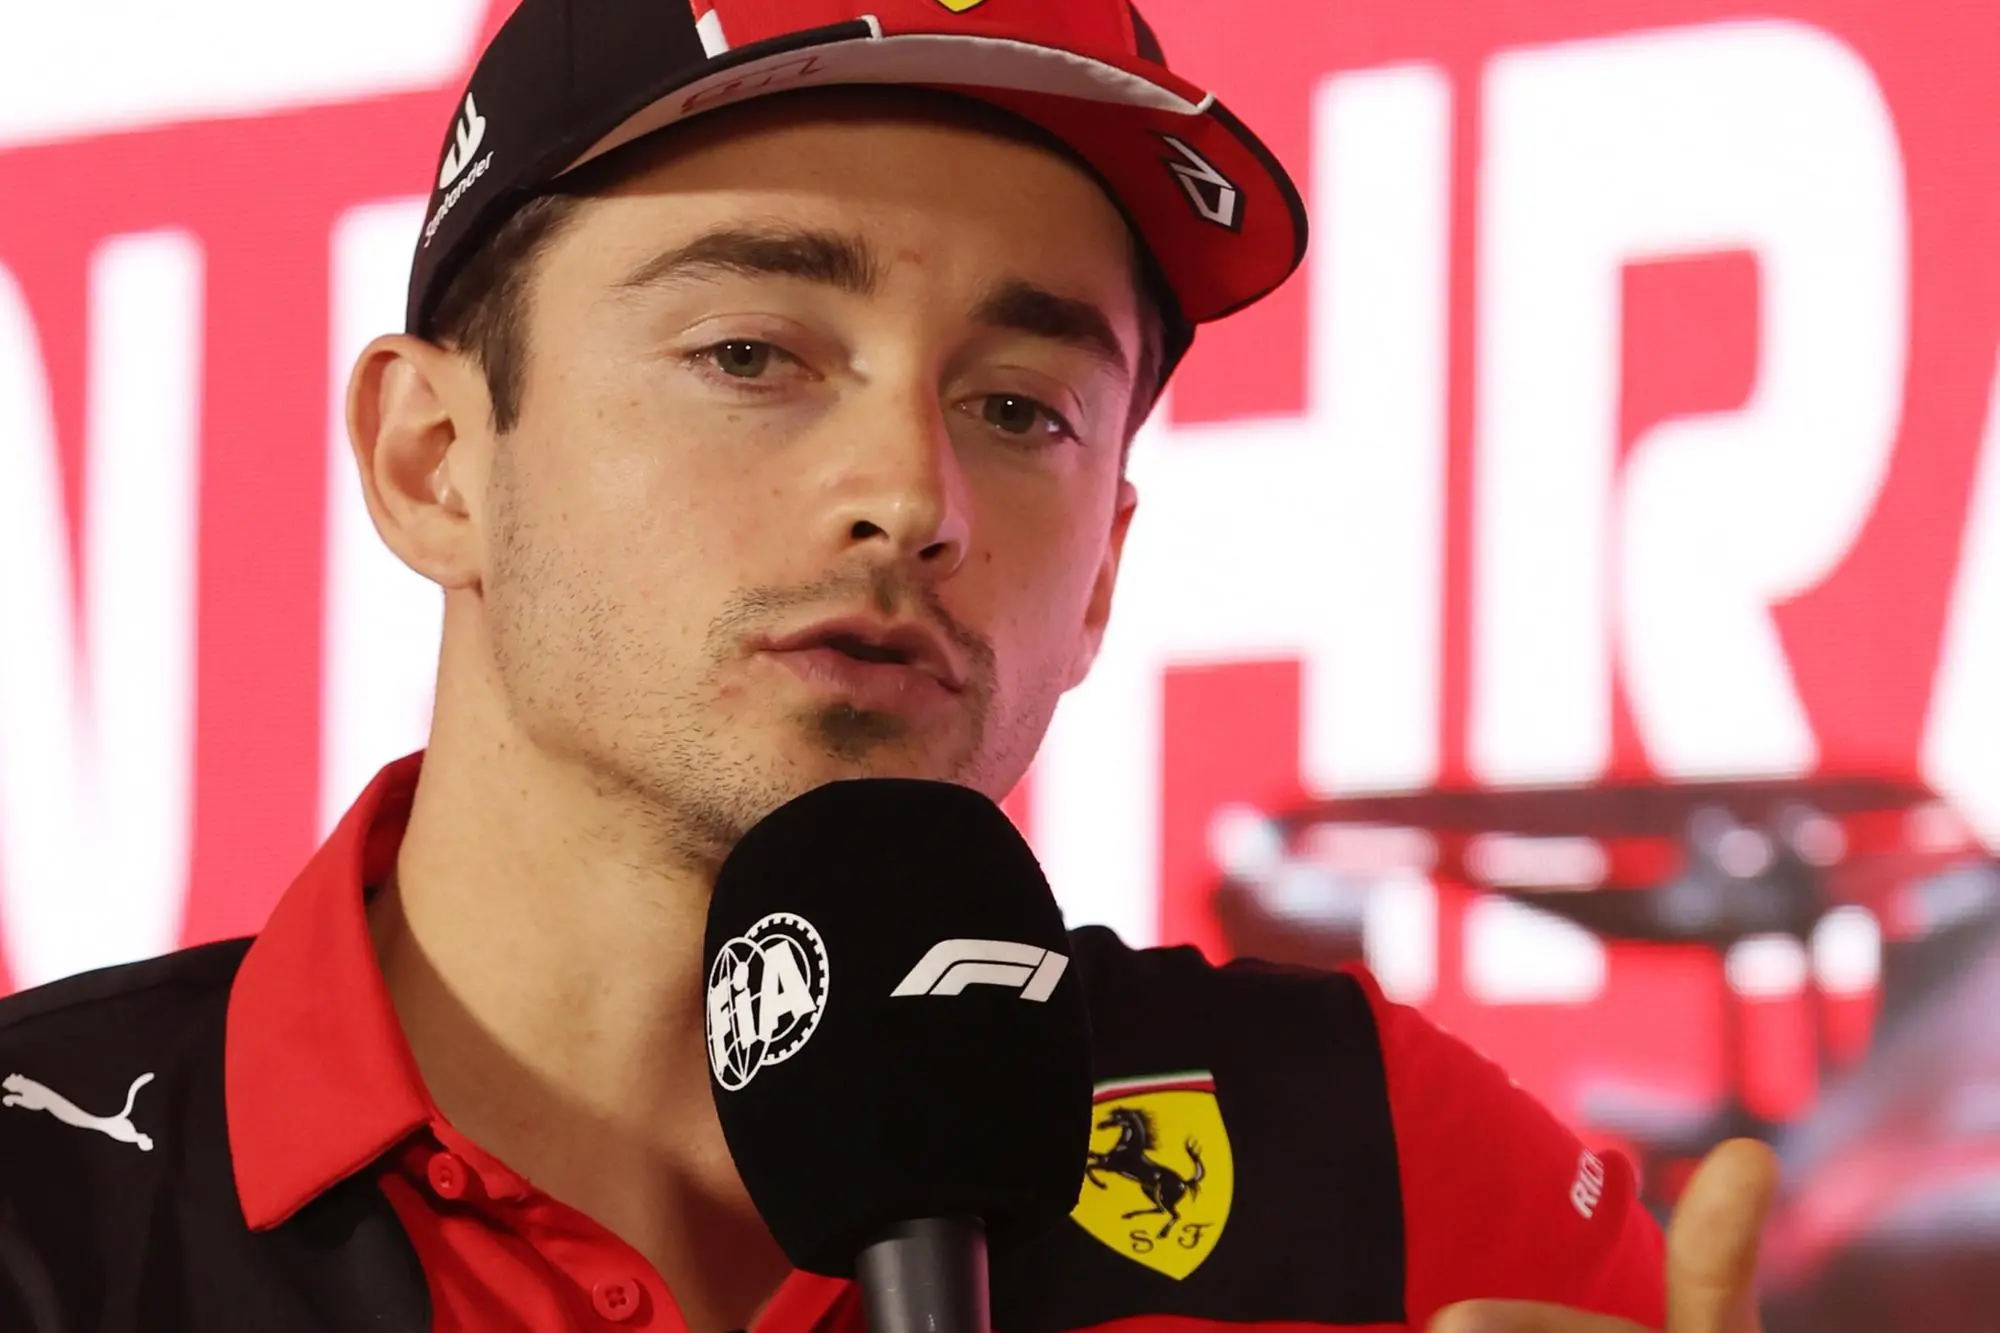 epa10498727 Monaco's Formula One driver Charles Leclerc of Scuderia Ferrari attends a press conference at the Bahrain International Circuit in Sakhir, Bahrain, 02 March 2023. The Formula One Grand Prix of Bahrain takes place on 05 March. EPA/Ali Haider